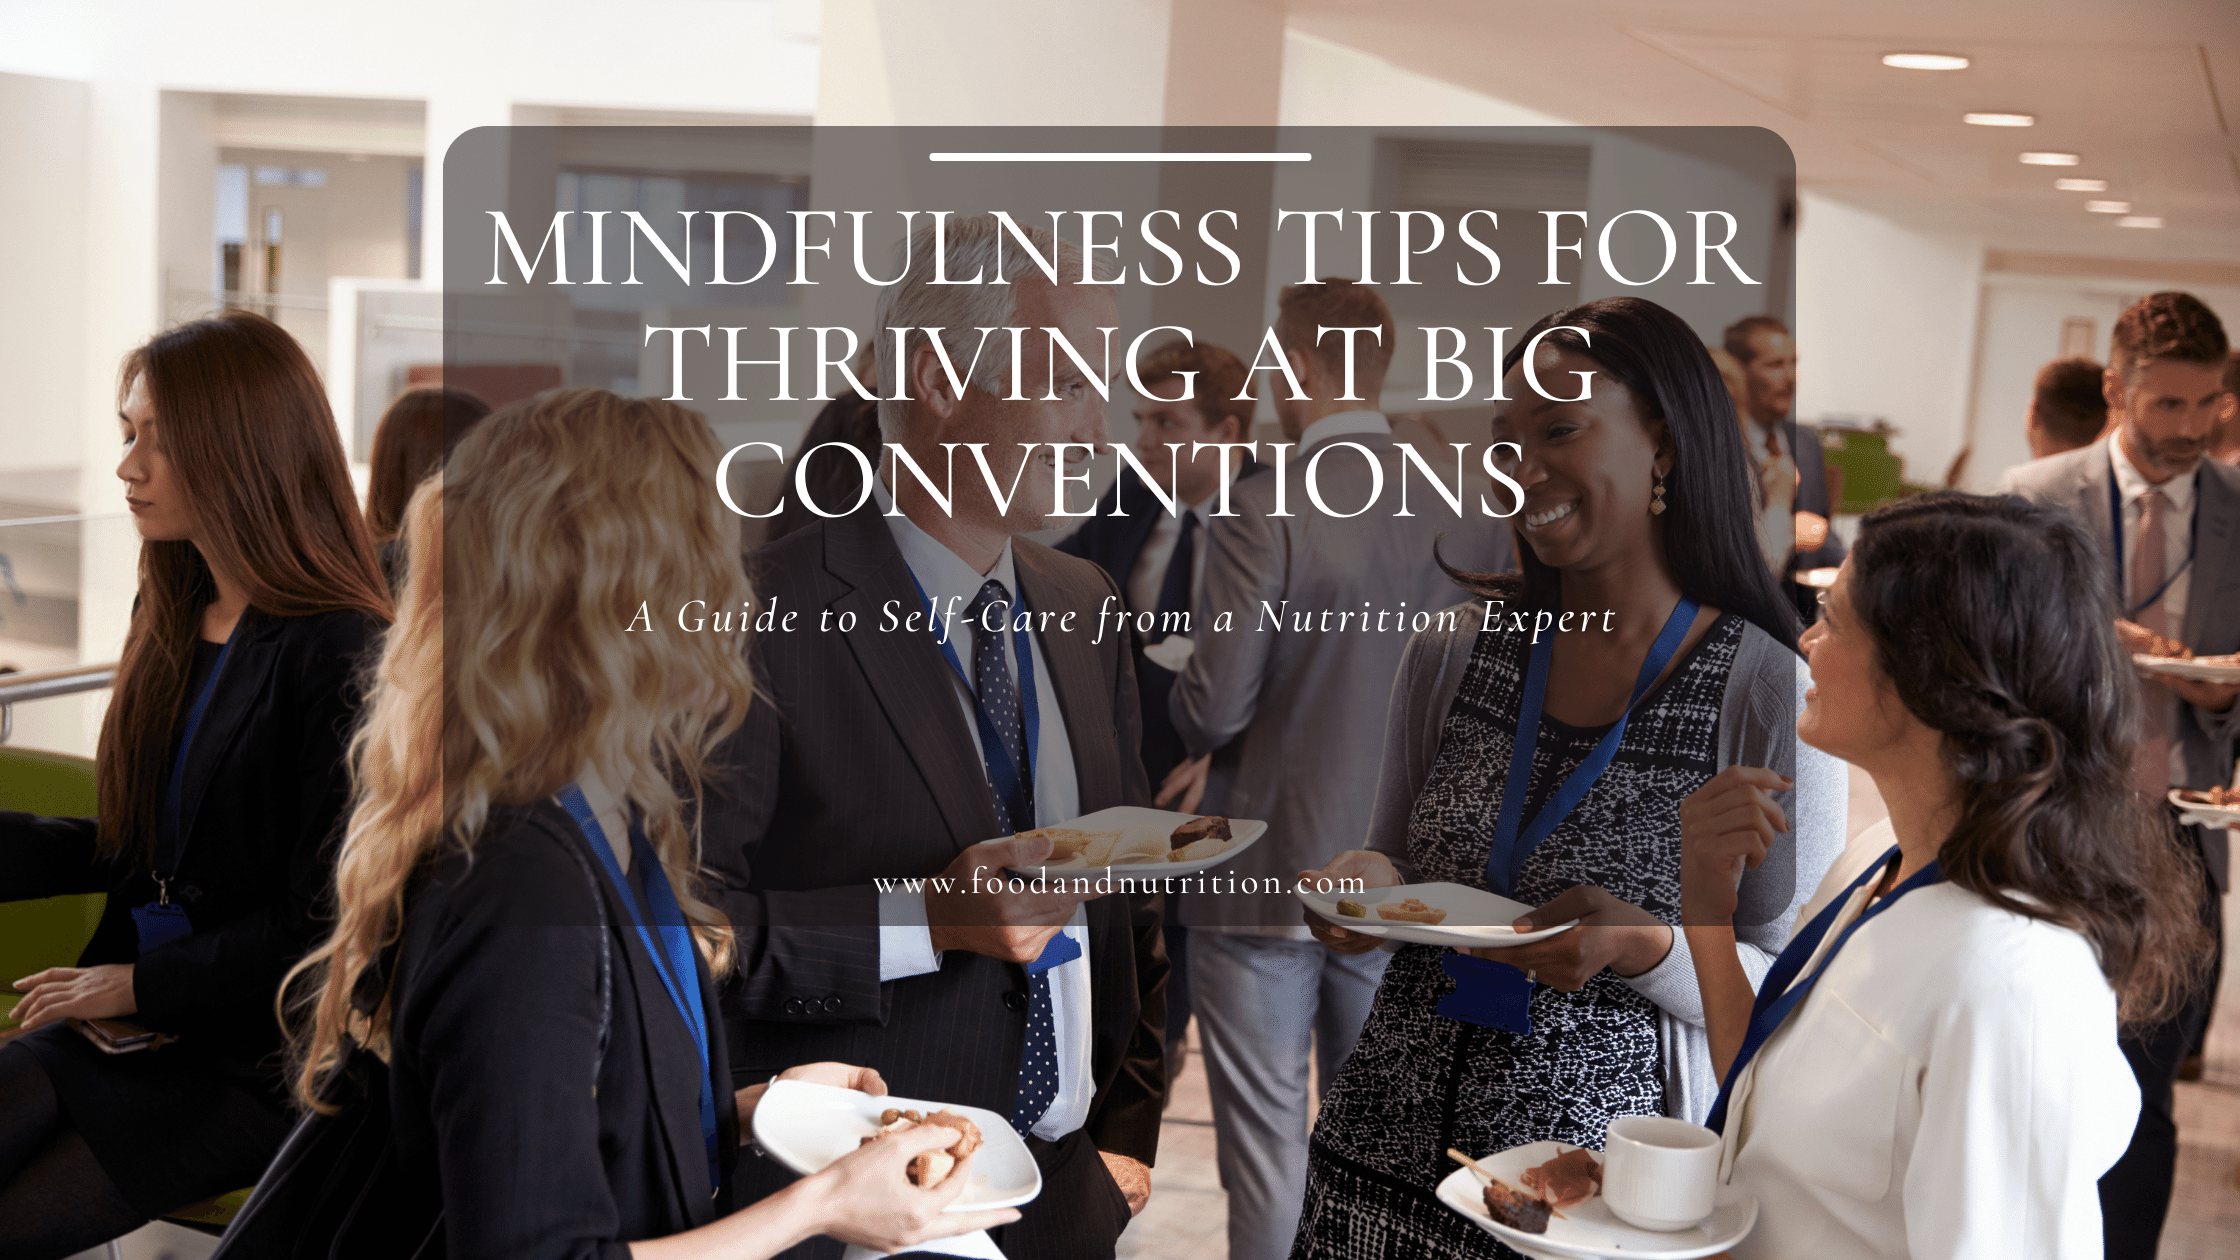 Mindfulness Tips for Thriving at Big Conventions